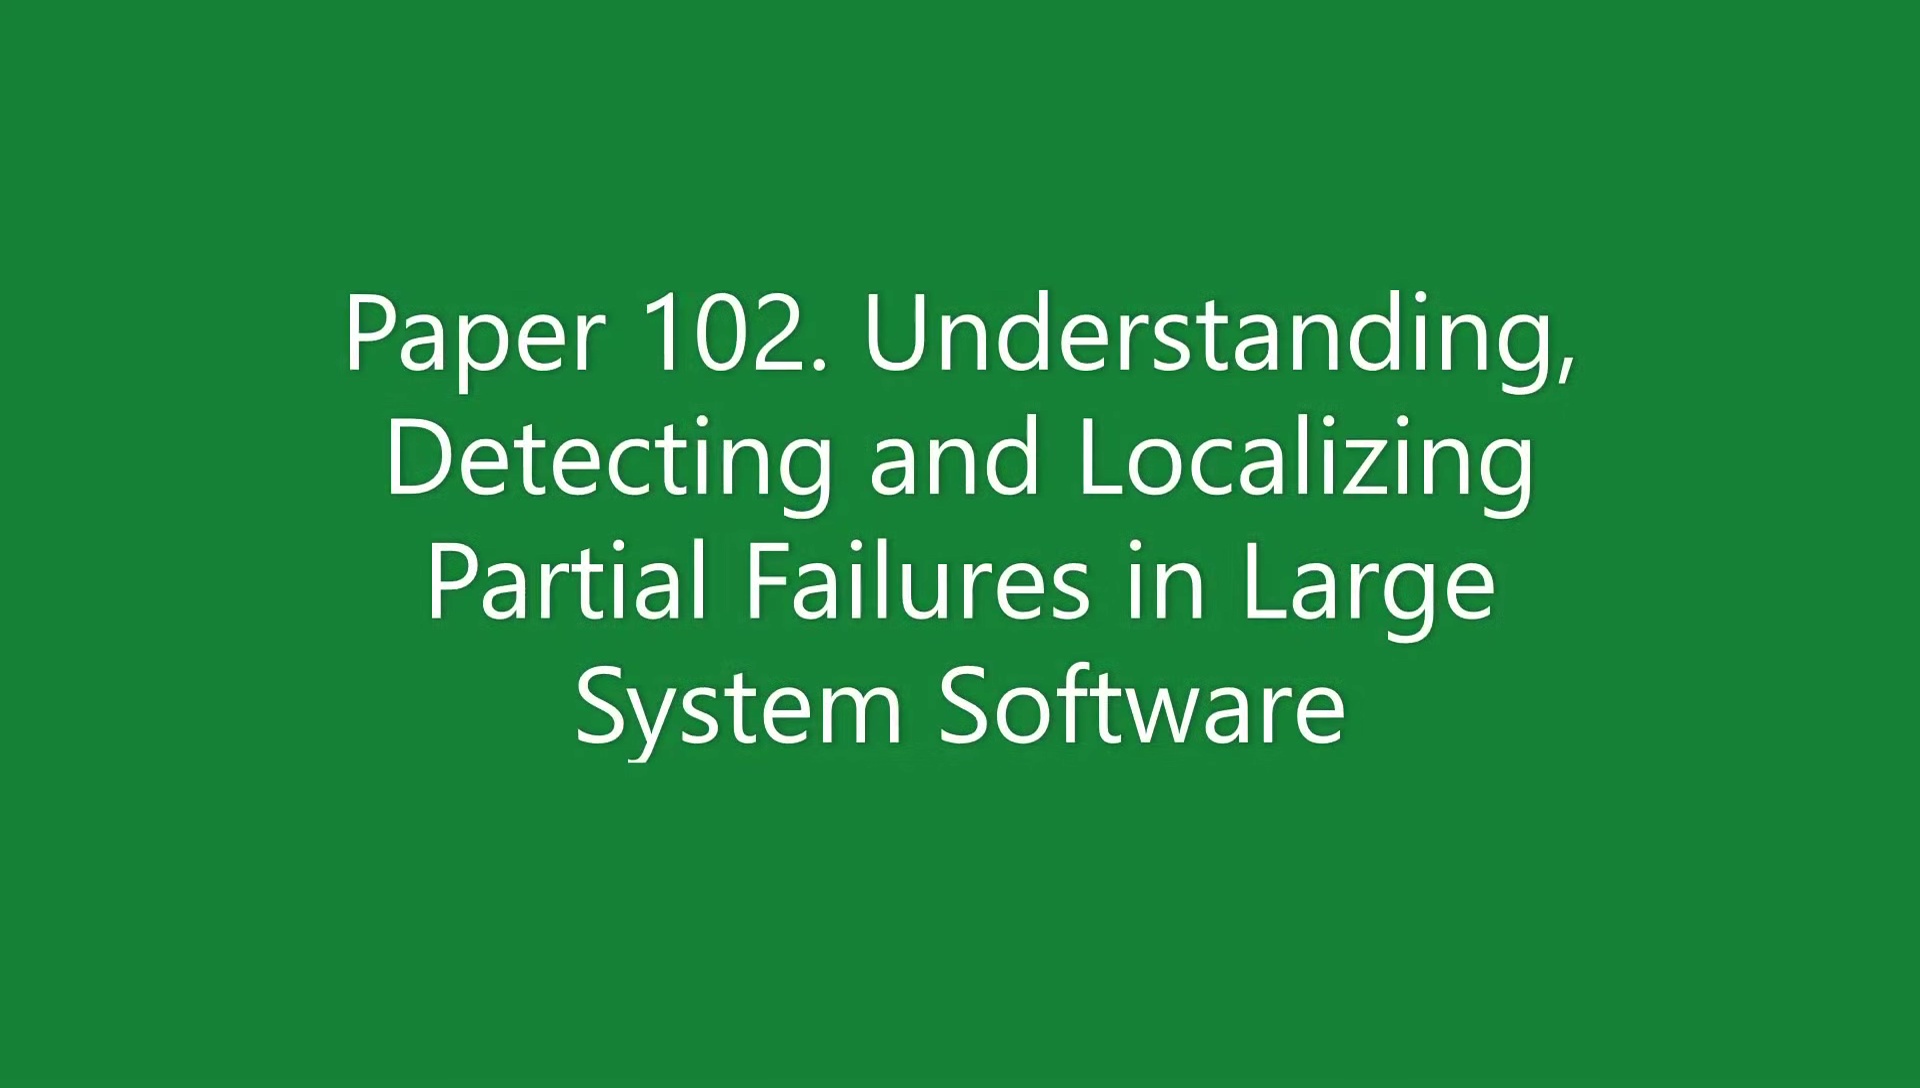 This is a talk on “Understanding, Detecting and Localizing Partial Failures in Large System Software”  paper for distributed systems reading group